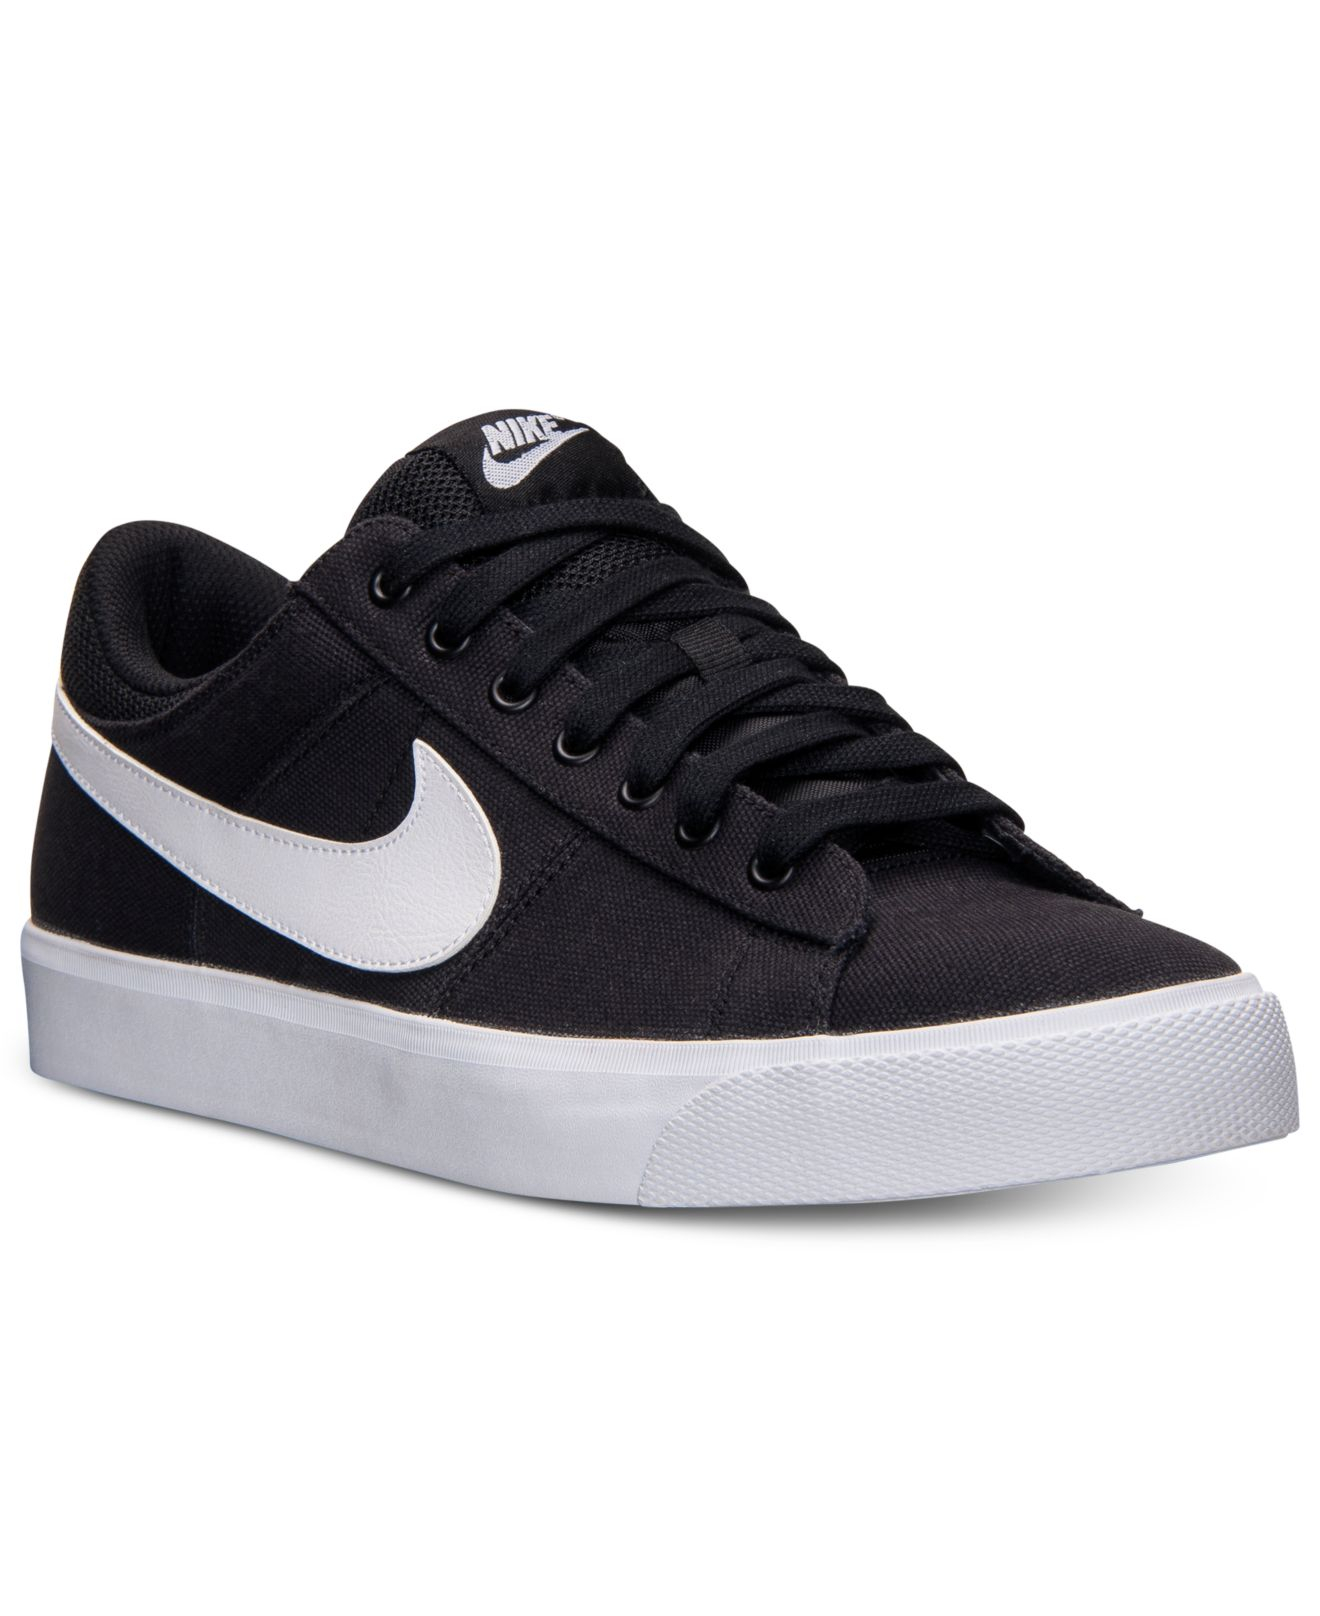 Lyst - Nike Men'S Match Supreme Hi Textile Casual Sneakers From Finish ...